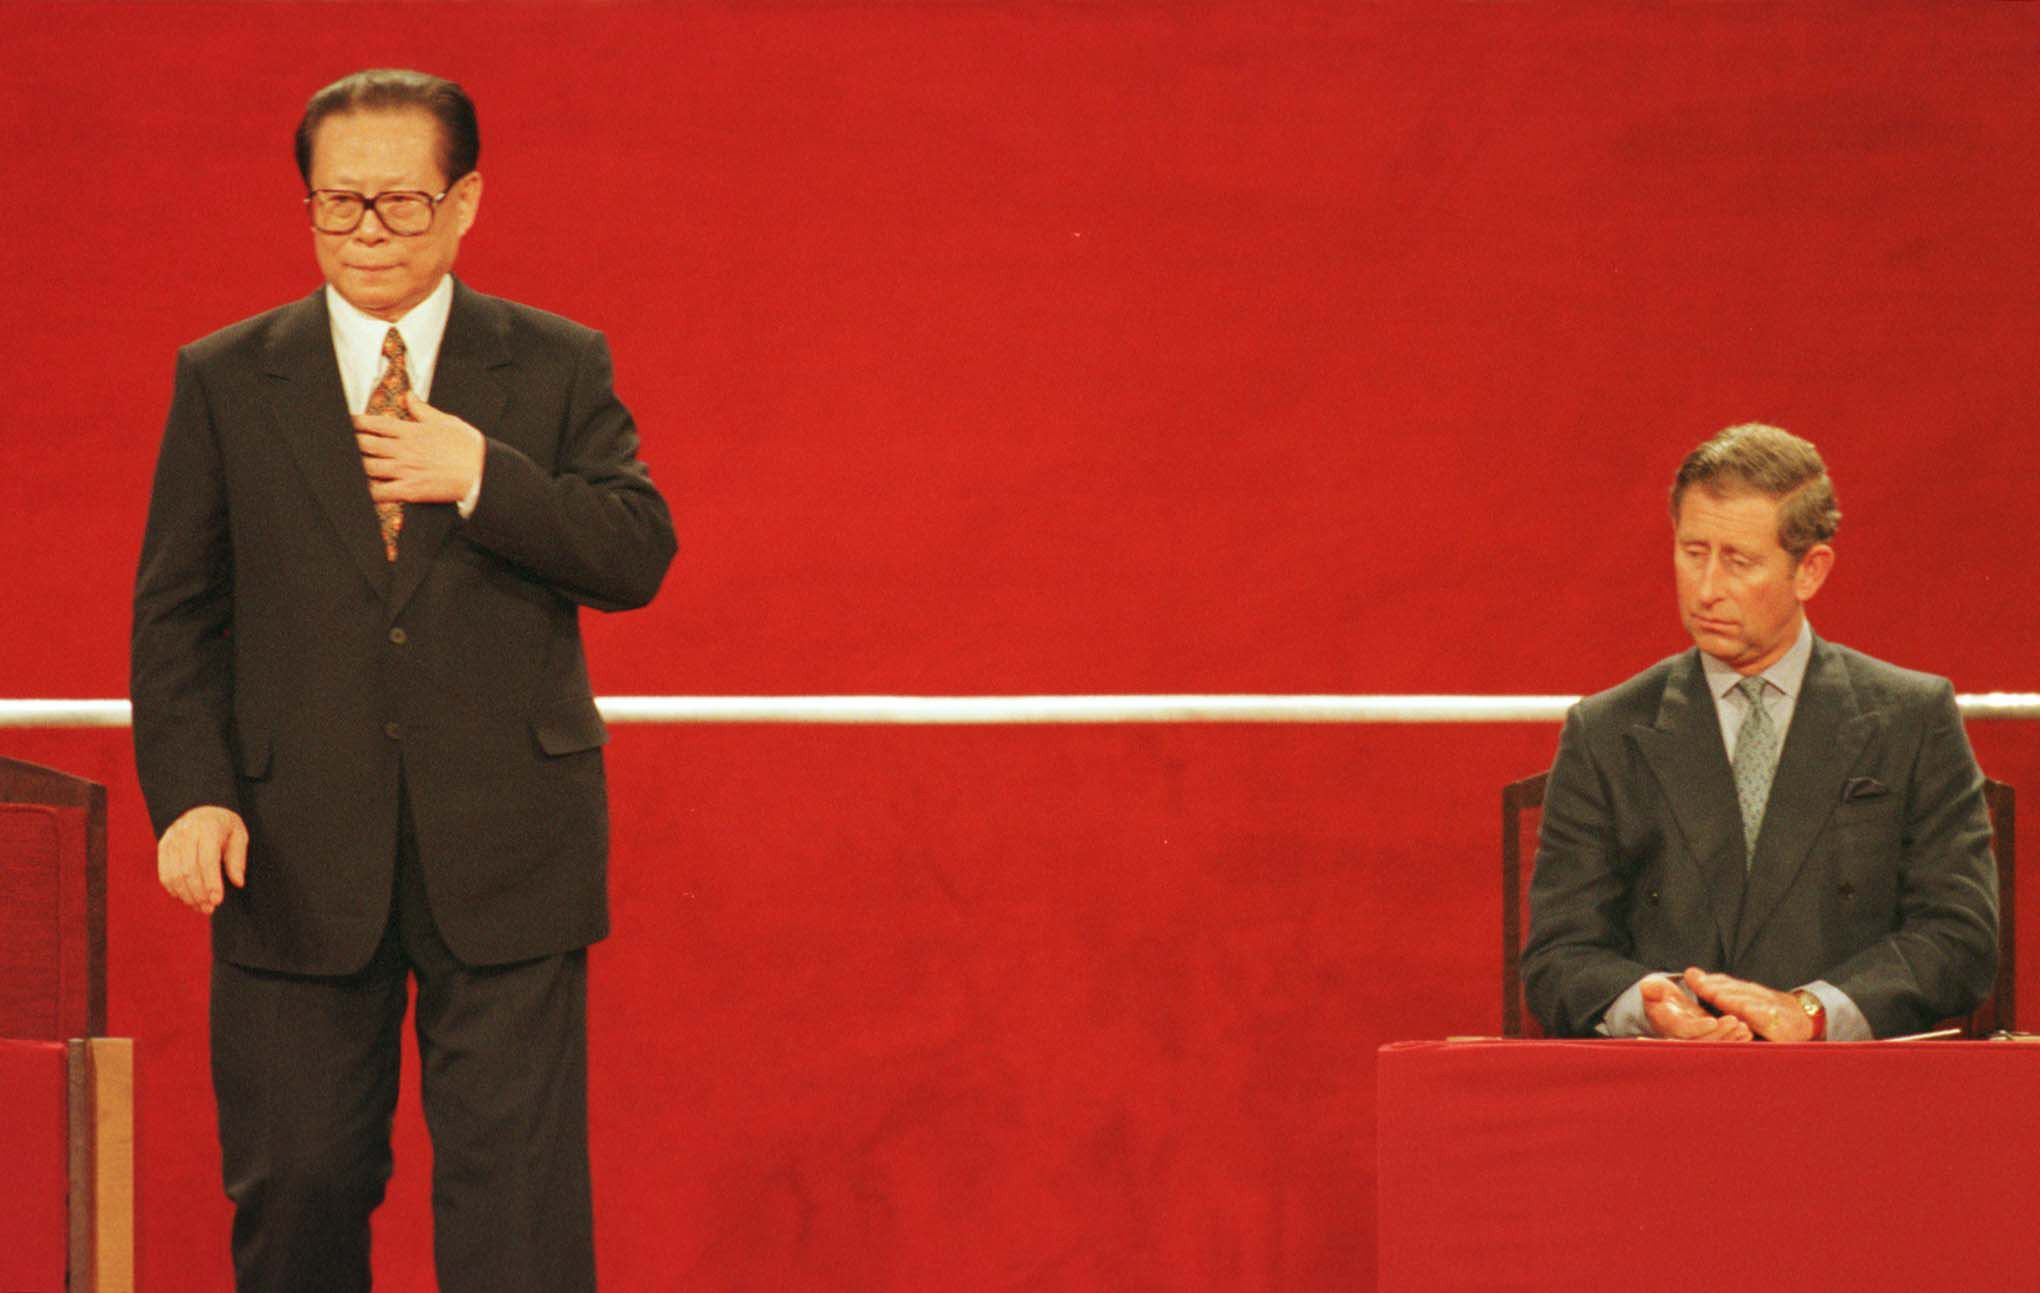 Chinese President Jiang Zemin (left) rises to speak at the Hong Kong Convention Center following the handover of Hong Kong to China on July 1, 1997, as Britain’s then-prince of Wales, Charles Windsor, applauds. Photo: AFP/pool